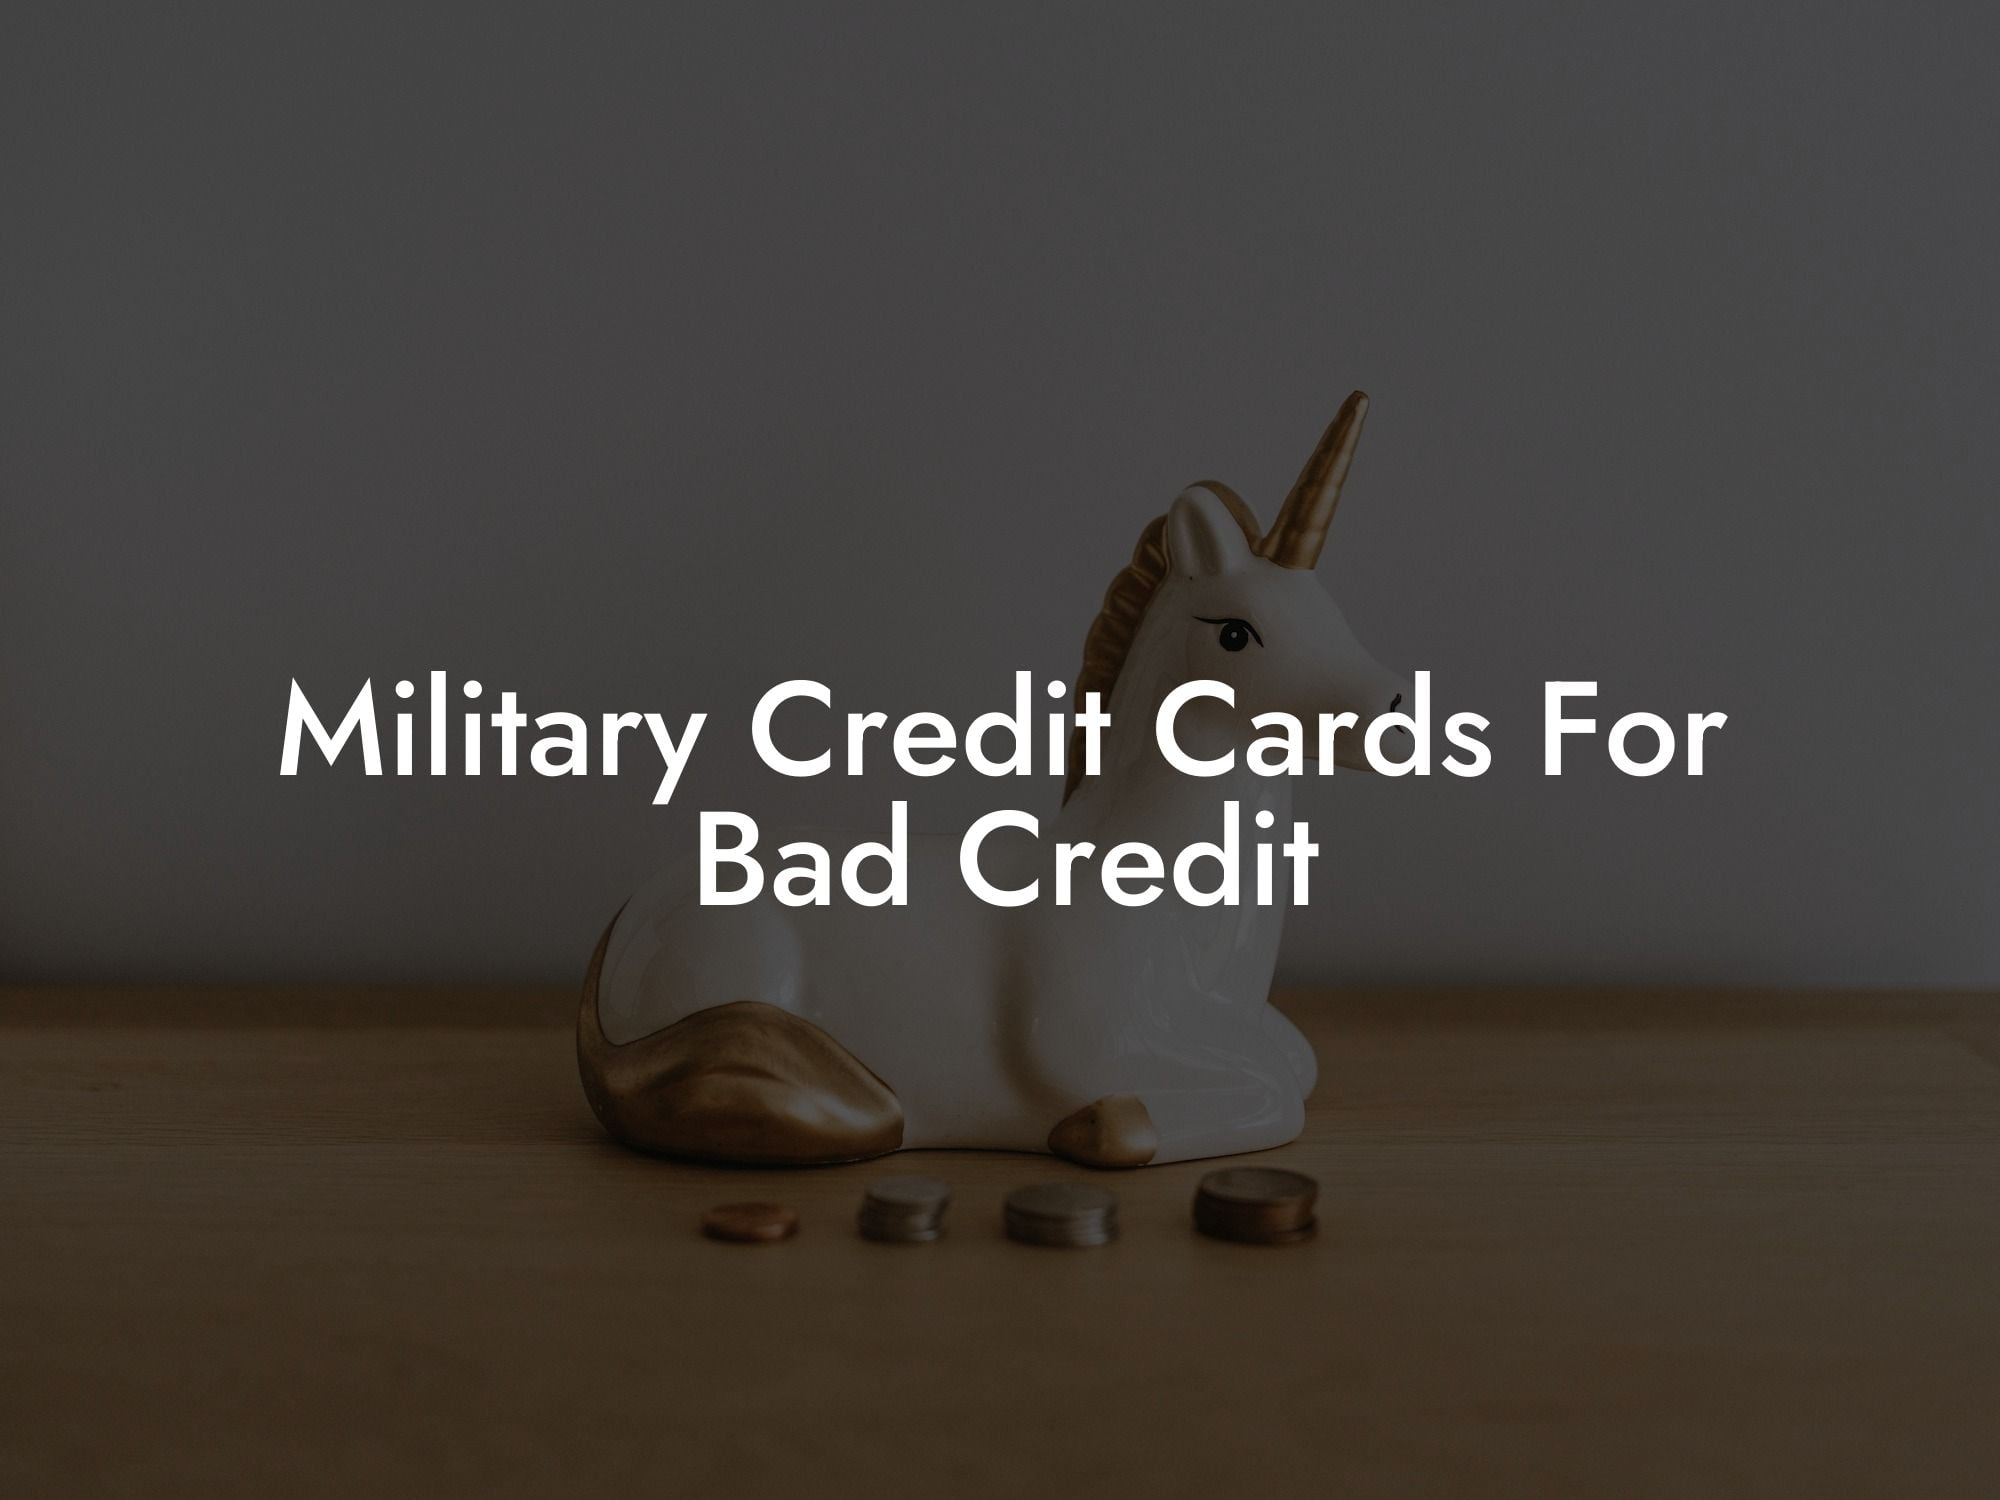 Military Credit Cards For Bad Credit